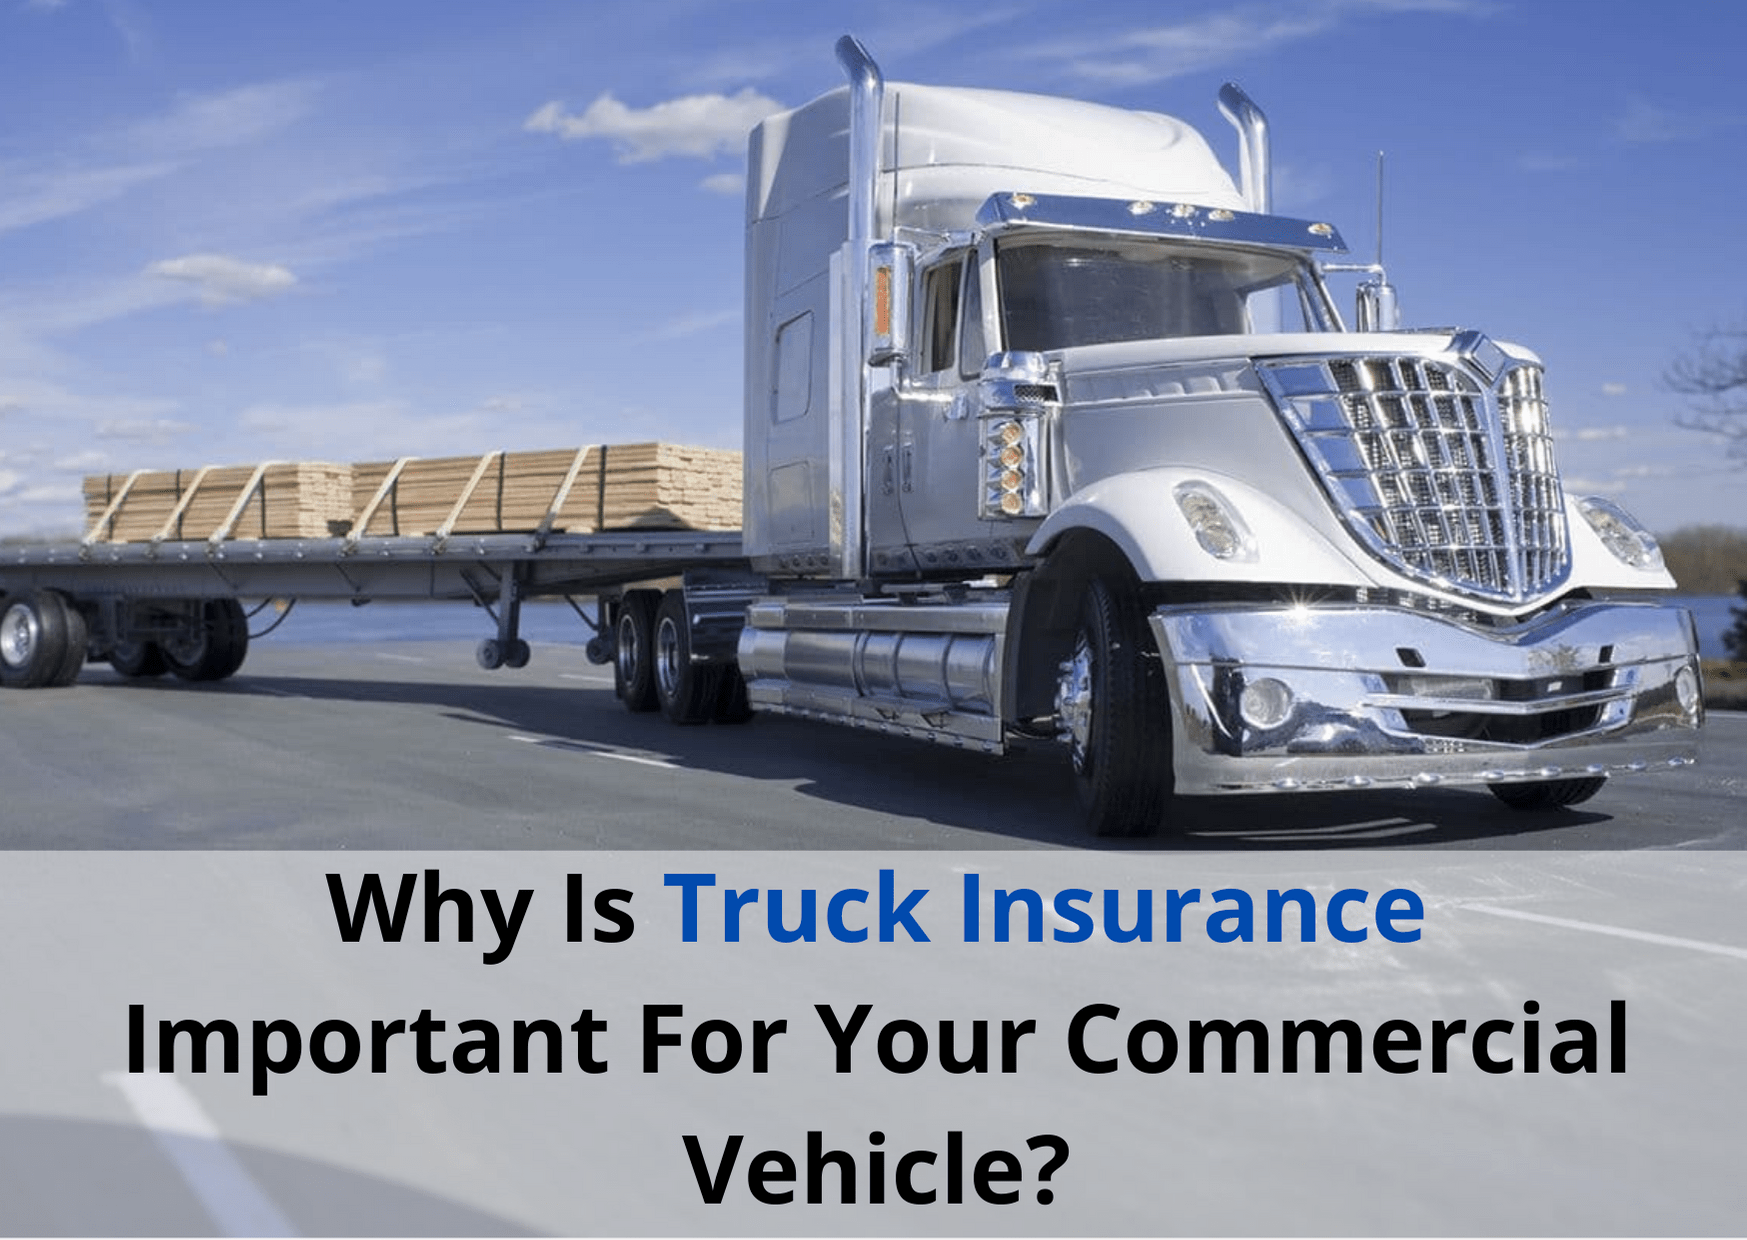 Why Is Truck Insurance Important For Your Commercial Vehicle